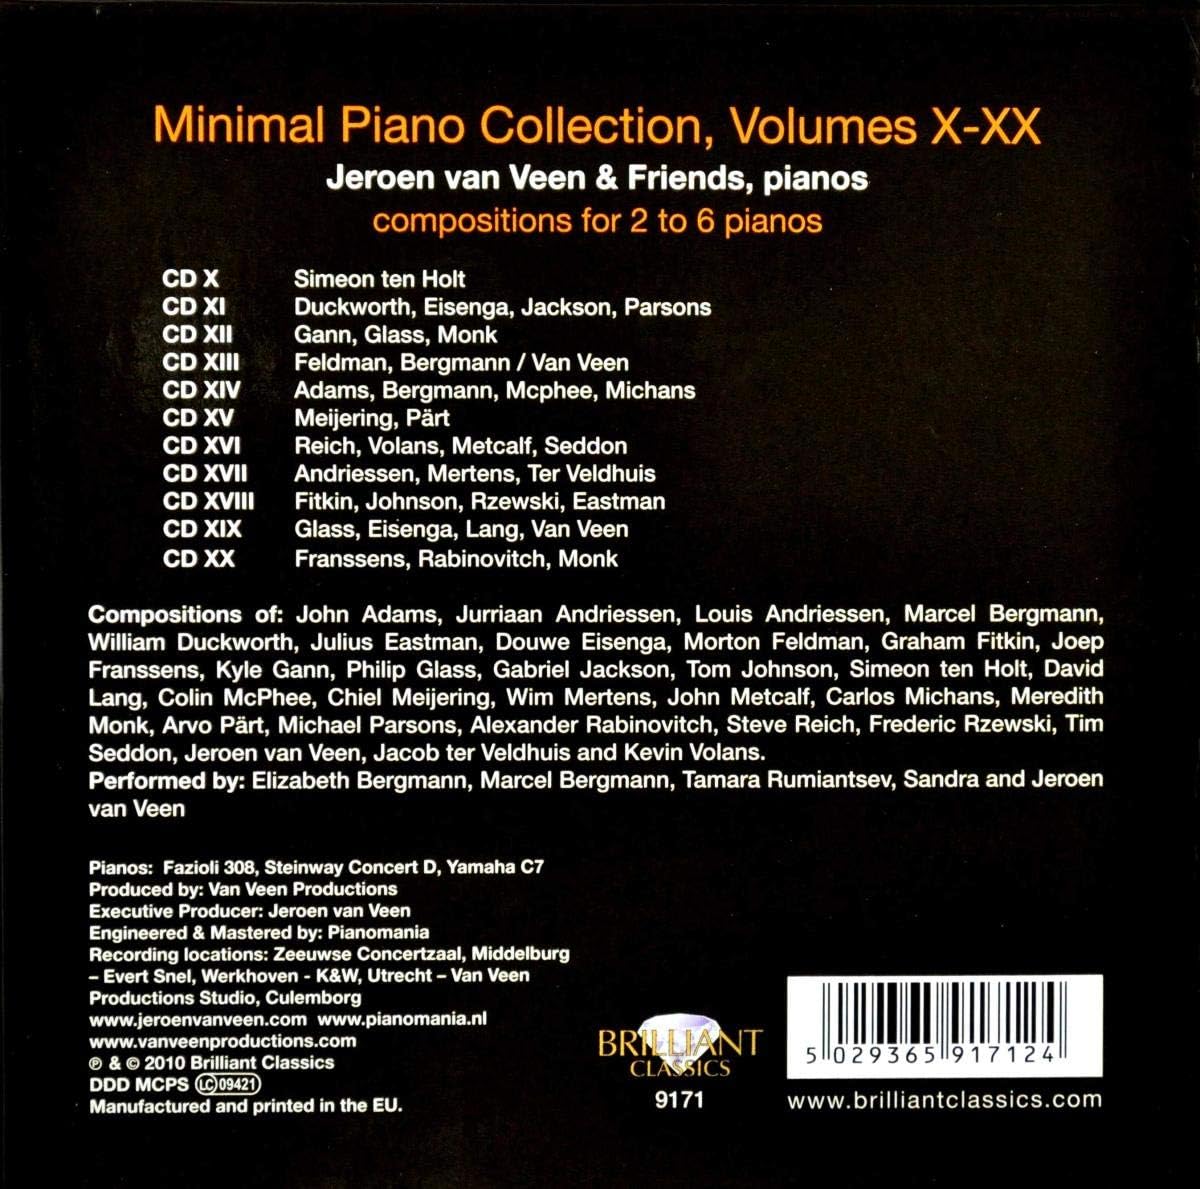 USED 11CD - Minimal Piano Collection Volume X-XX